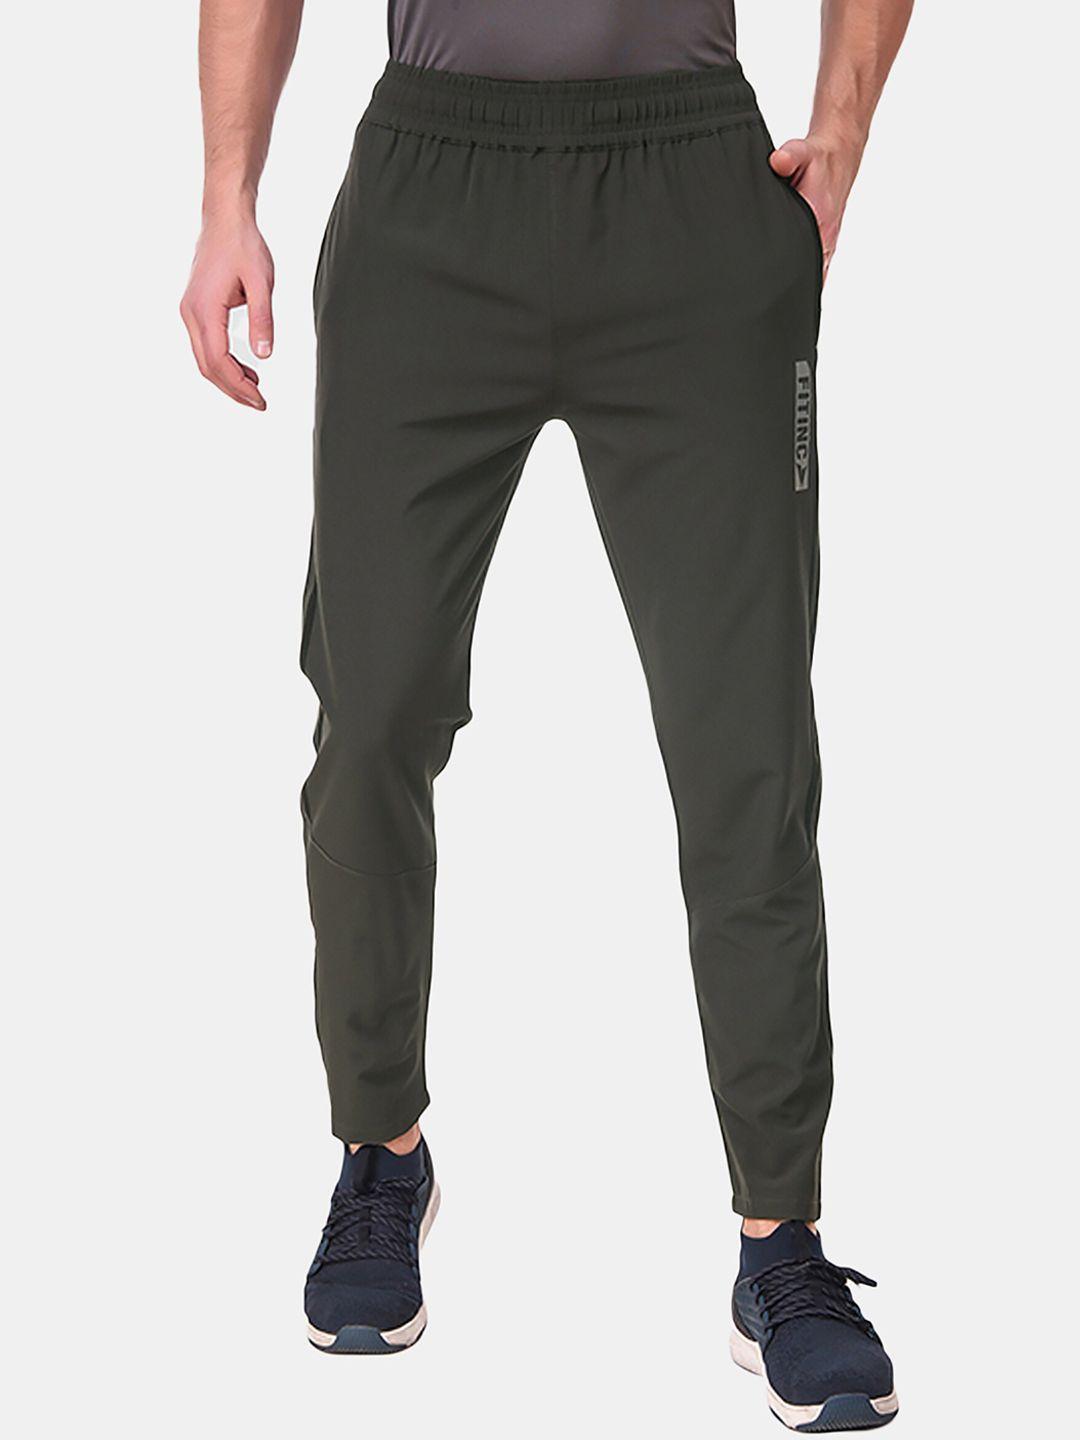 fitinc men grey solid dryfit light weight track pant